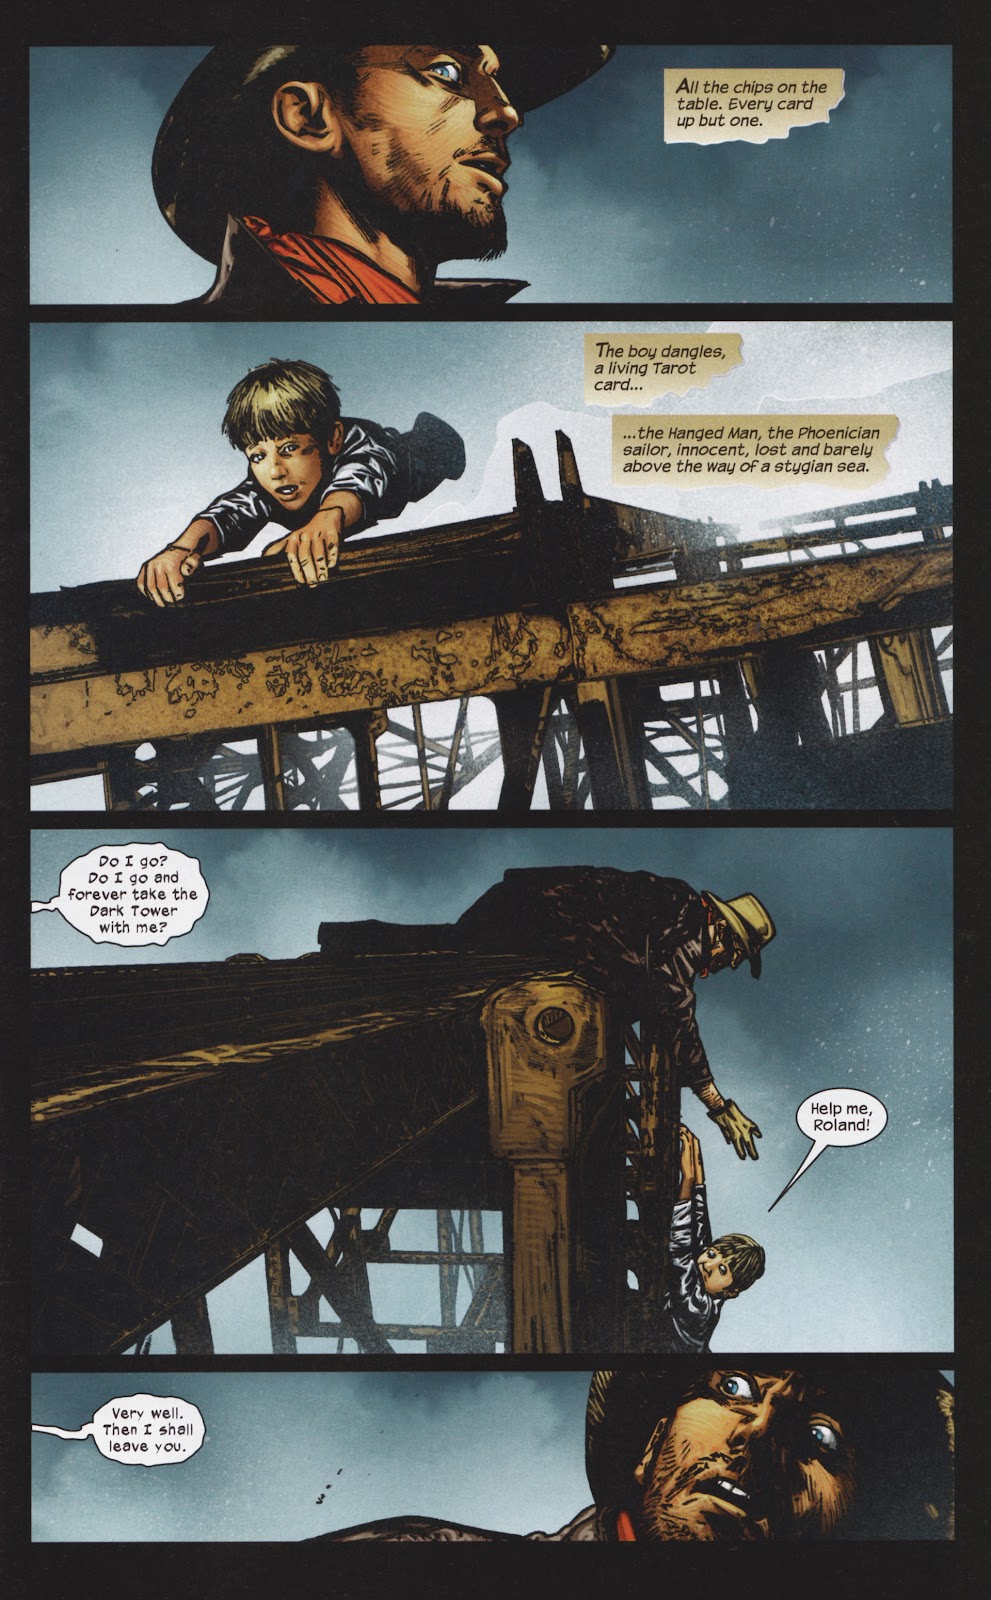 Dark Tower: The Gunslinger - The Man in Black issue 4 - Page 22